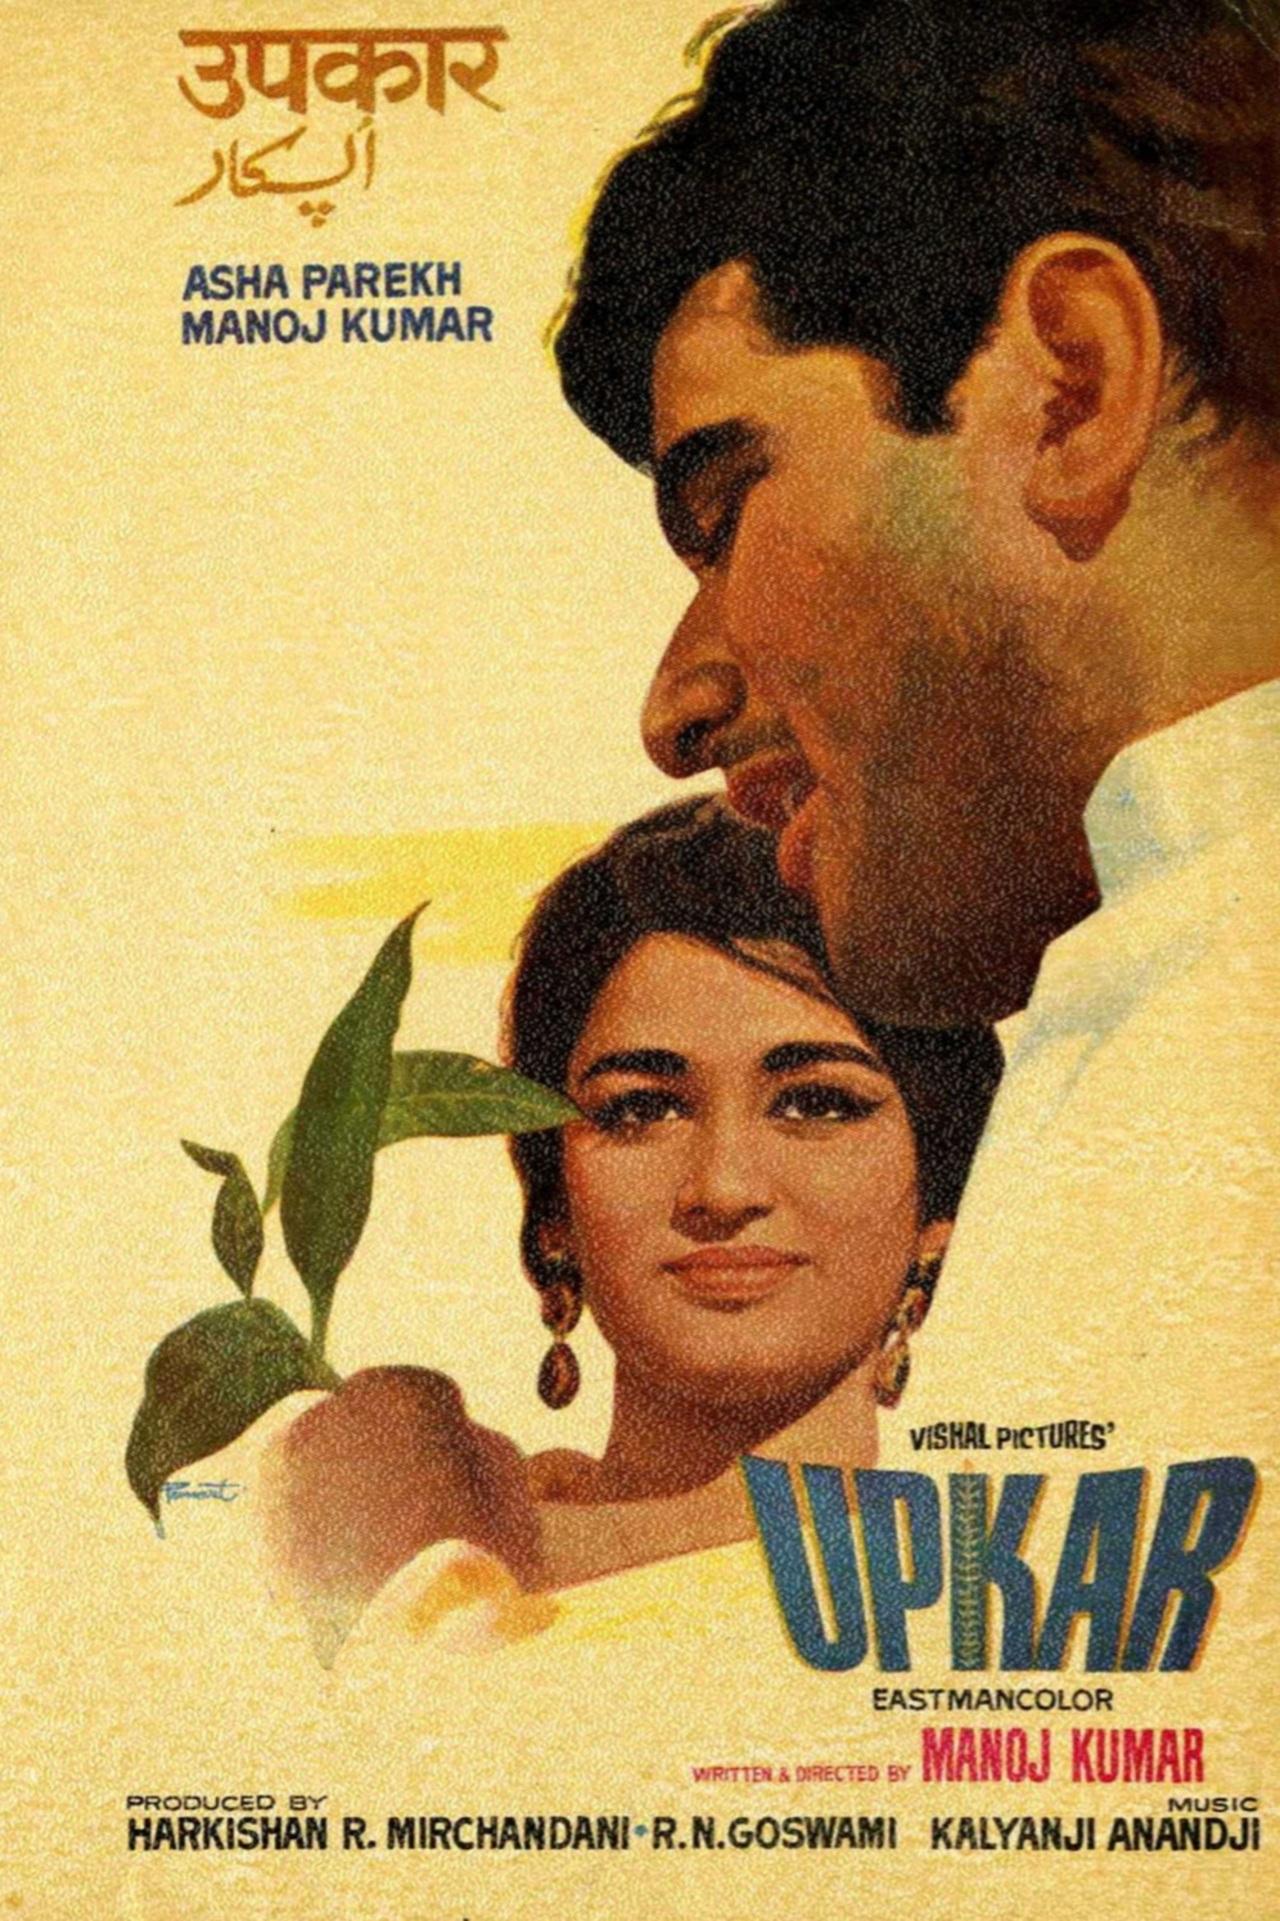 ‘Mere Desh Ki Dharti’ is an iconic Hindi song from the 1967 Bollywood film ‘Upkar’. The film was directed by Manoj Kumar, who also played the lead role in the movie